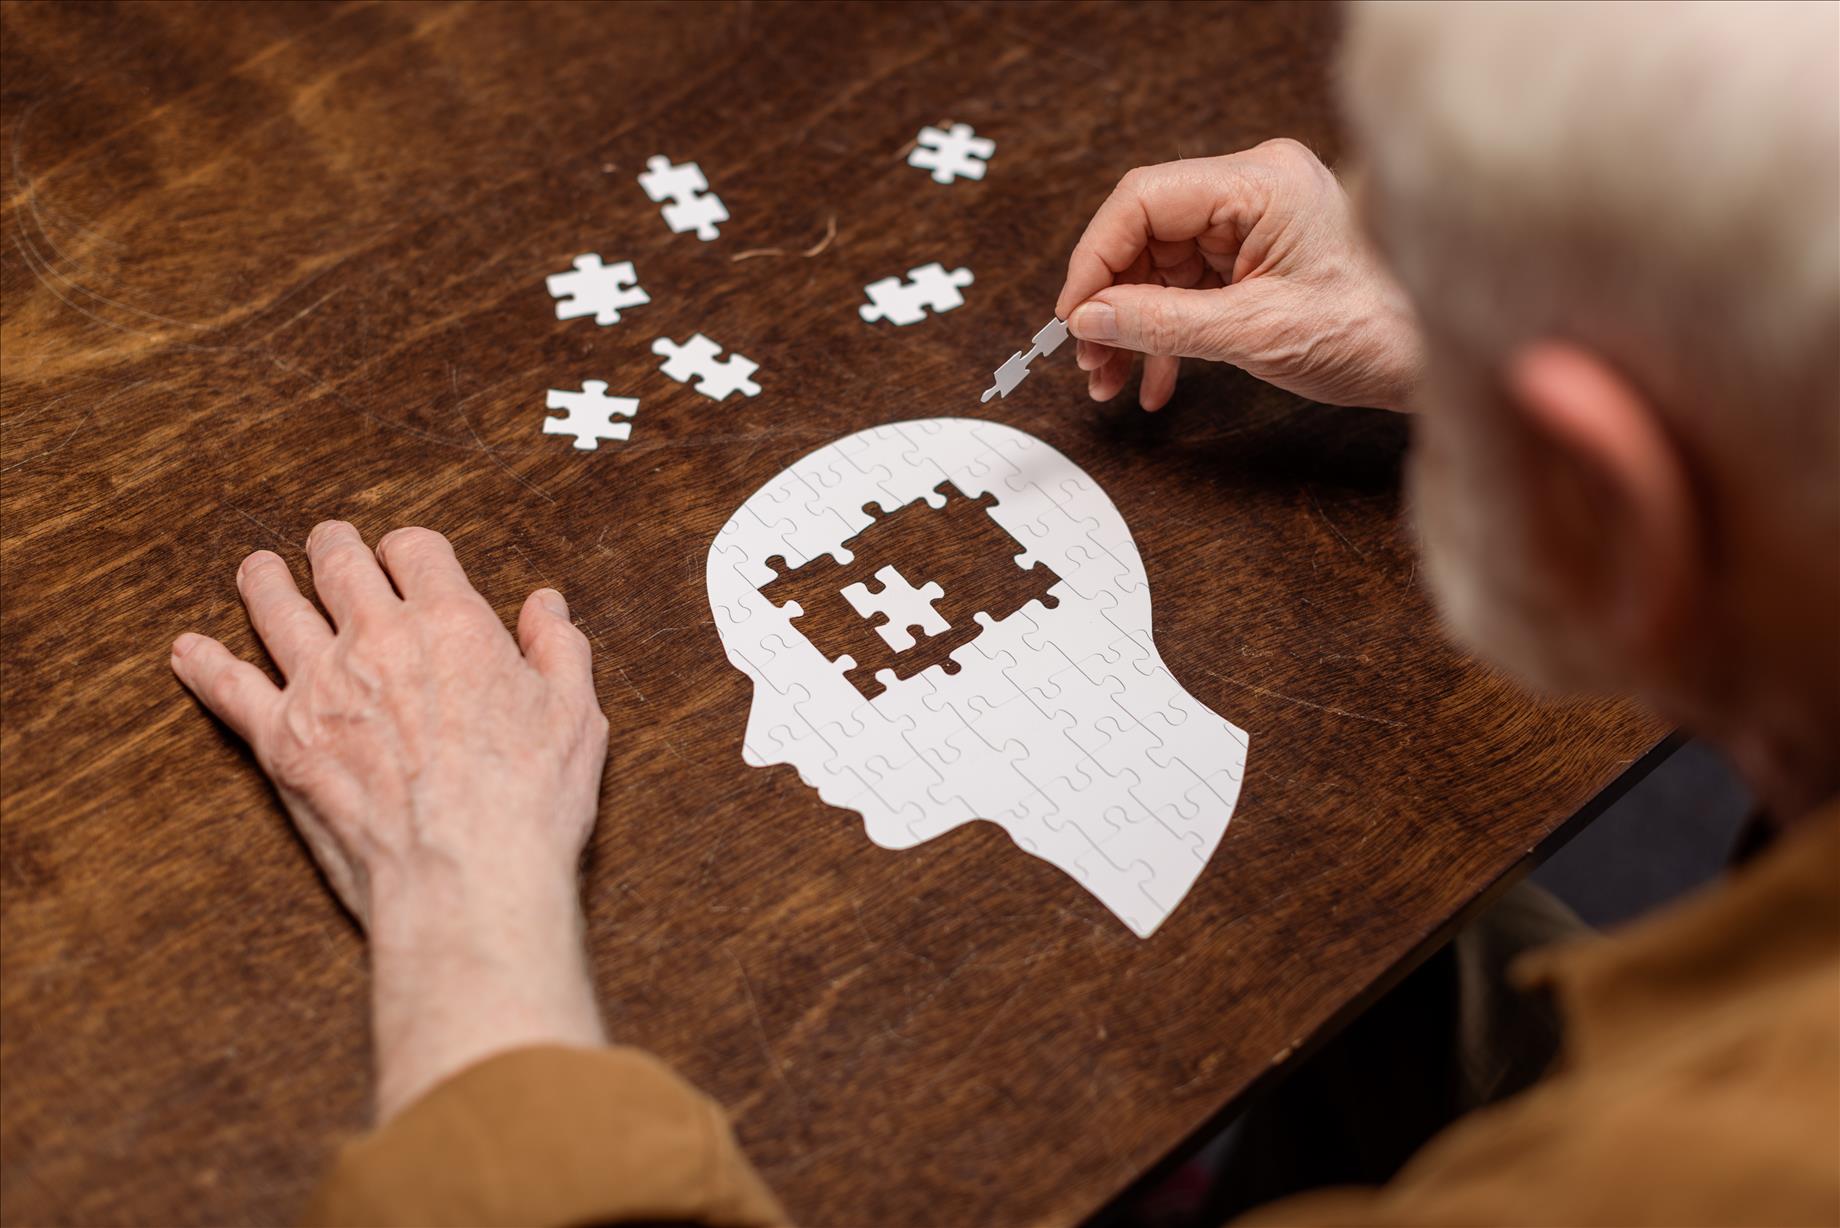 Alzheimer's Theory Undermined By Accusations Of Manipulated Data  But Does Not Bring Dementia Research To Its Knees